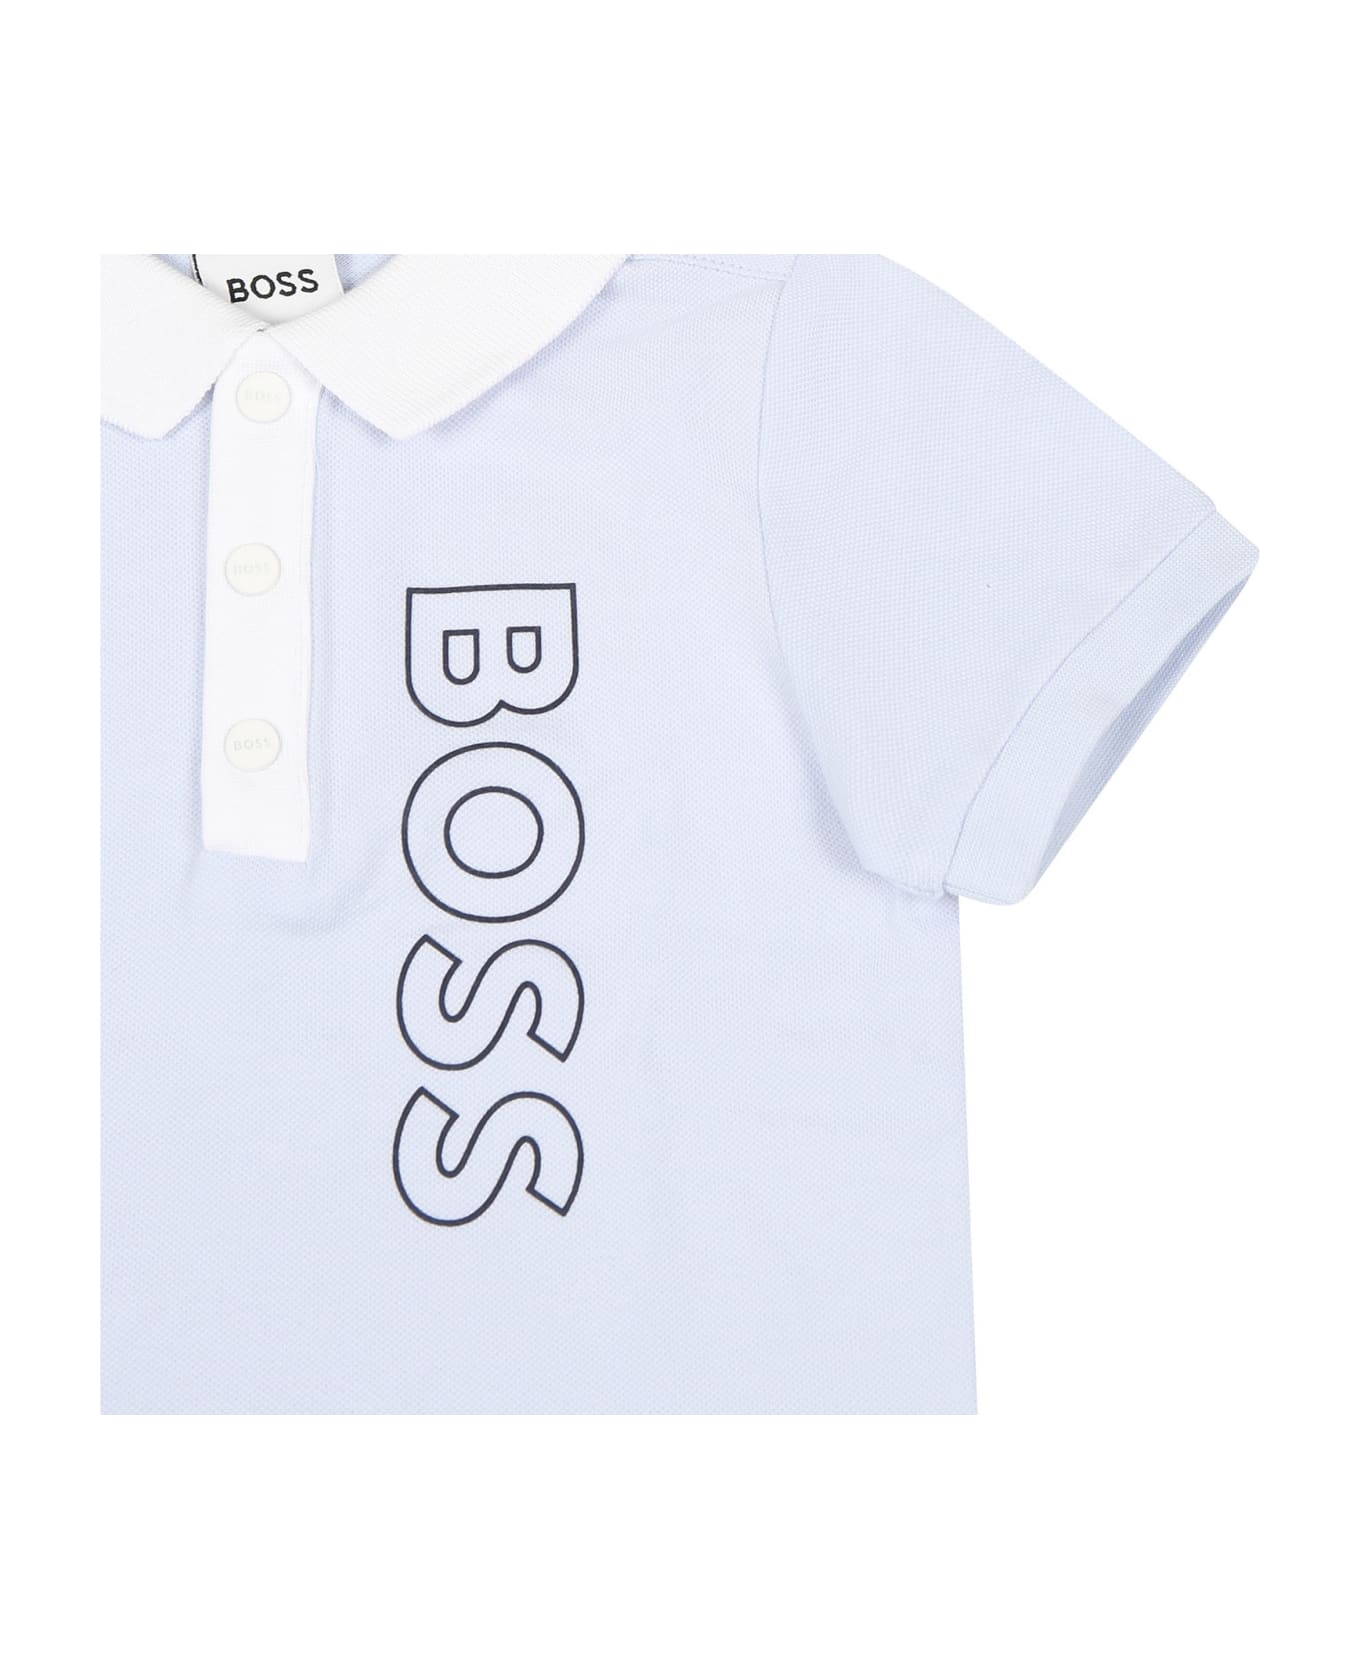 Hugo Boss Light Blue Suit For Baby Oy With Logo - Light Blue ボトムス